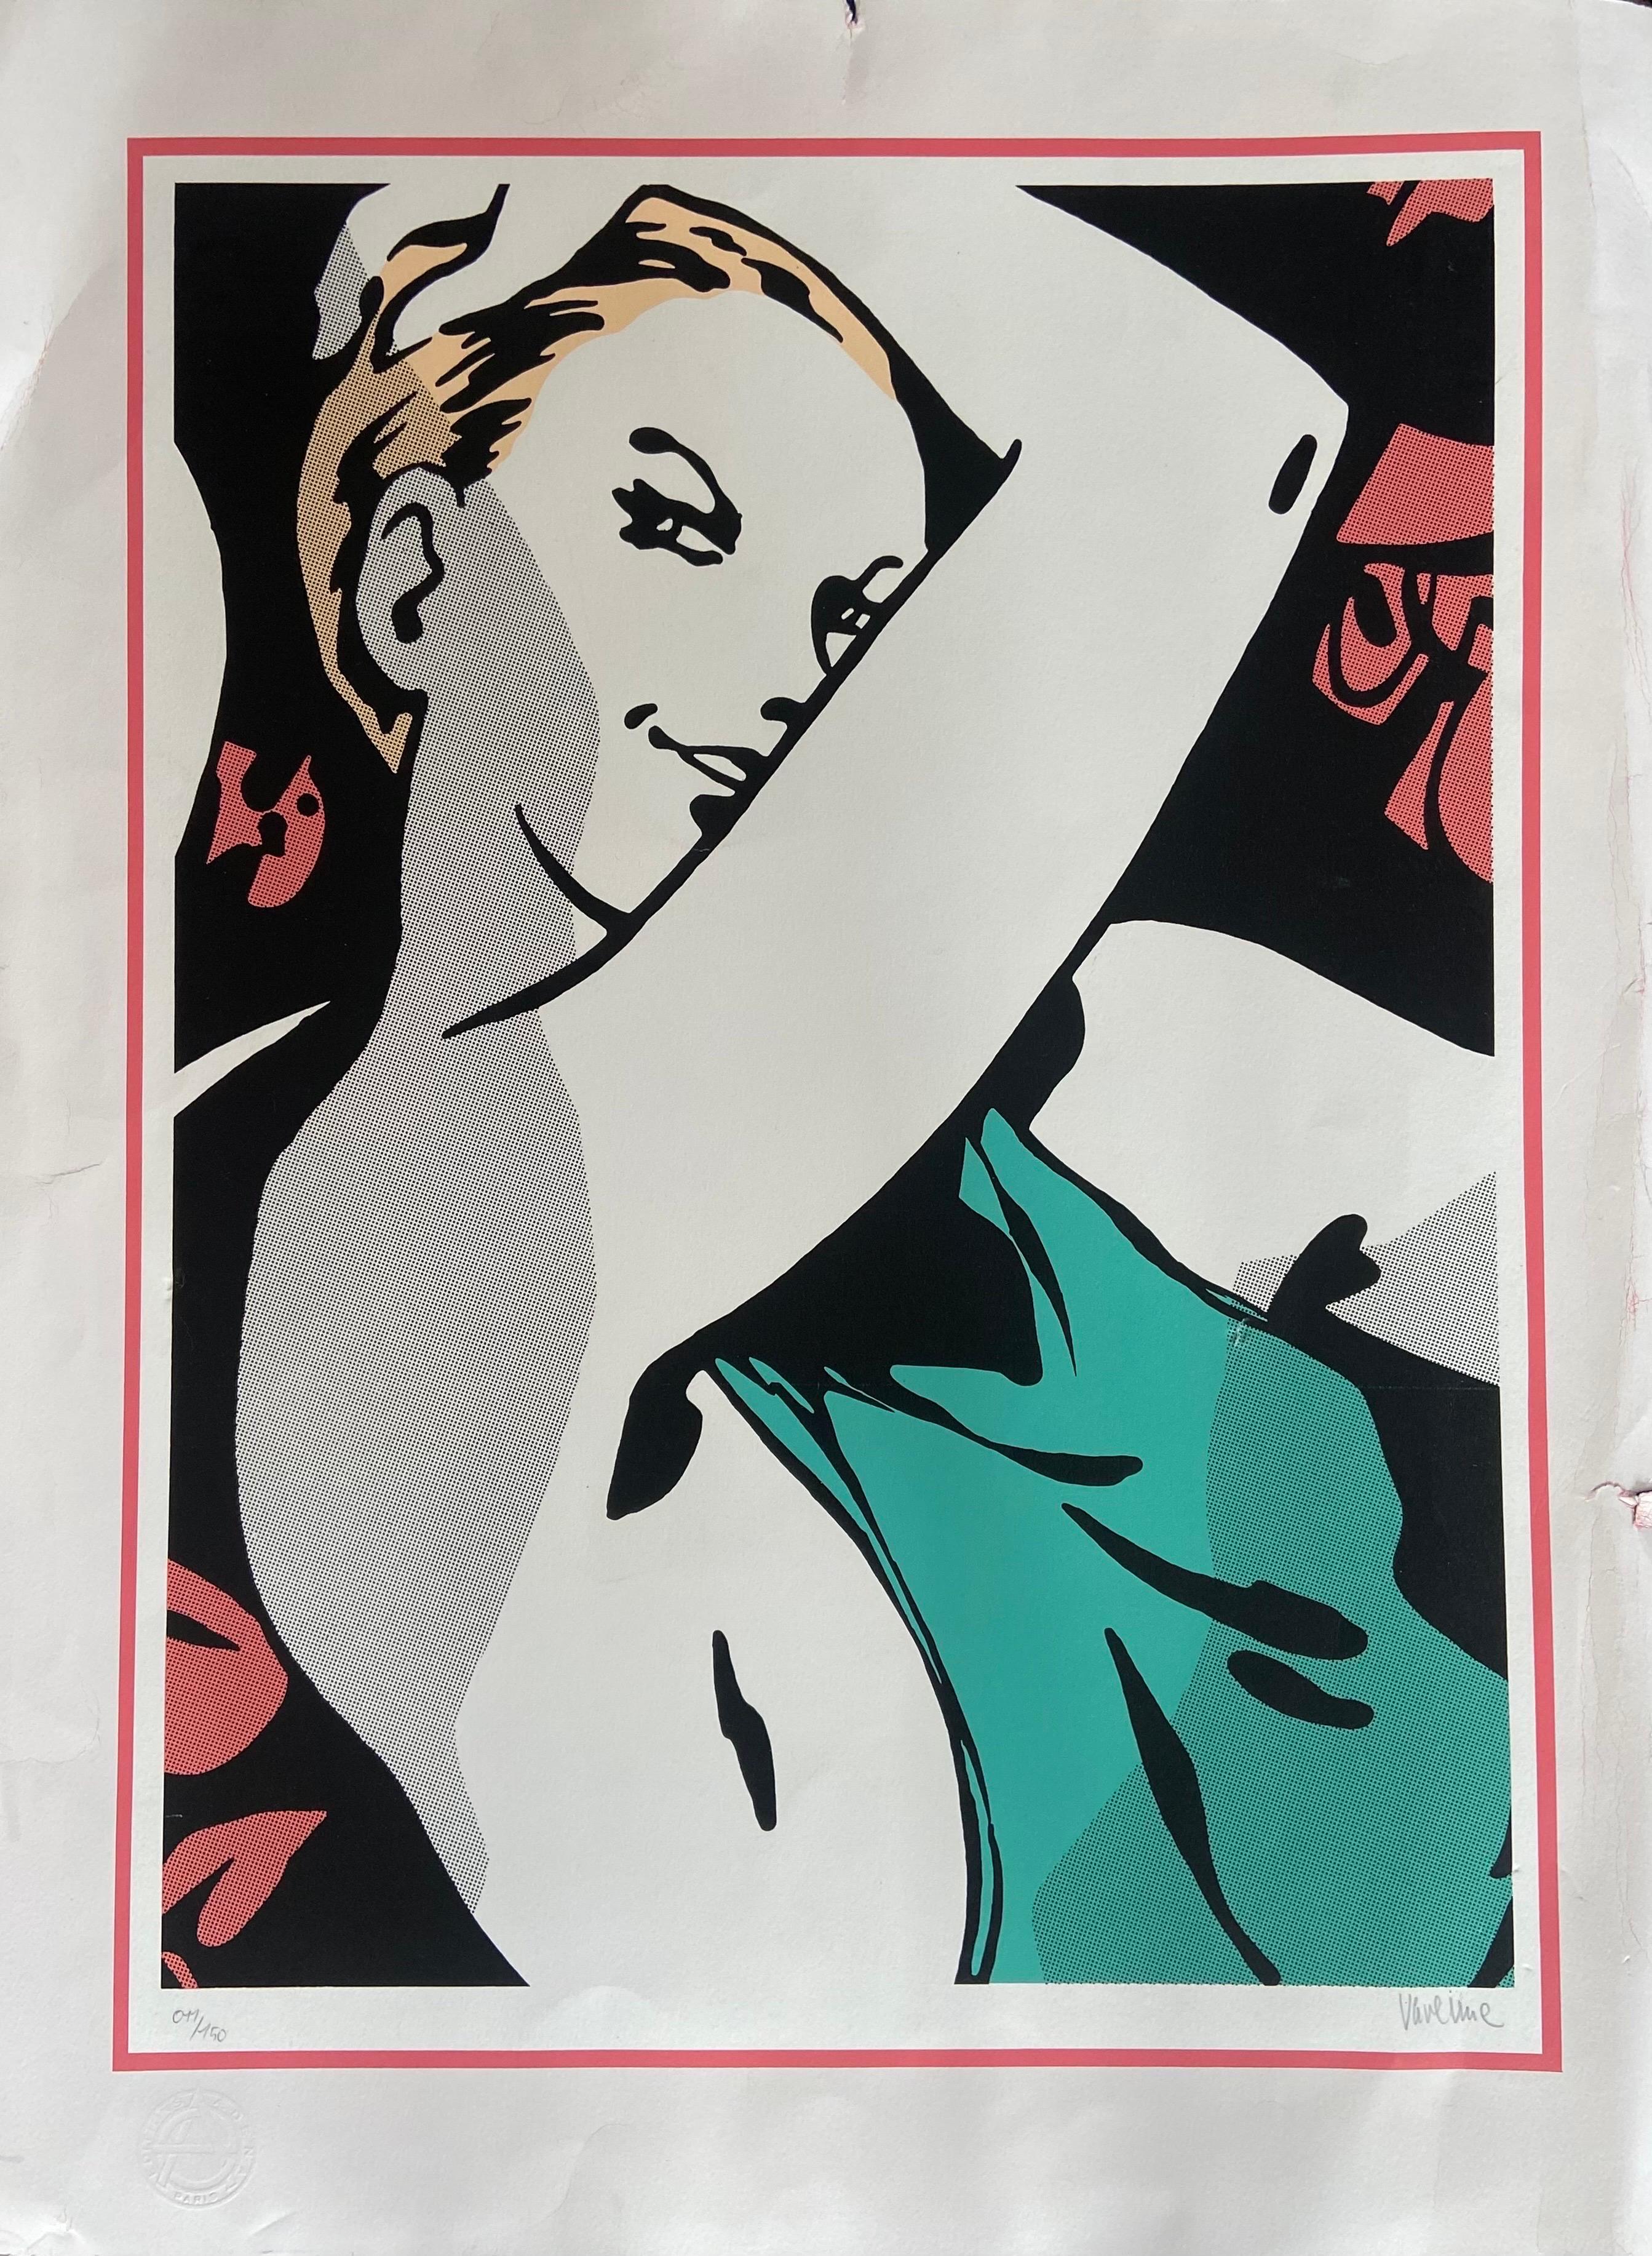 Here is a great example of artwork from the pop art period signed by Alex Varenne circa 1980. The artist is well known with his series of projects in the field of erotic comics during this time. This is a large piece in vivid colours representing a